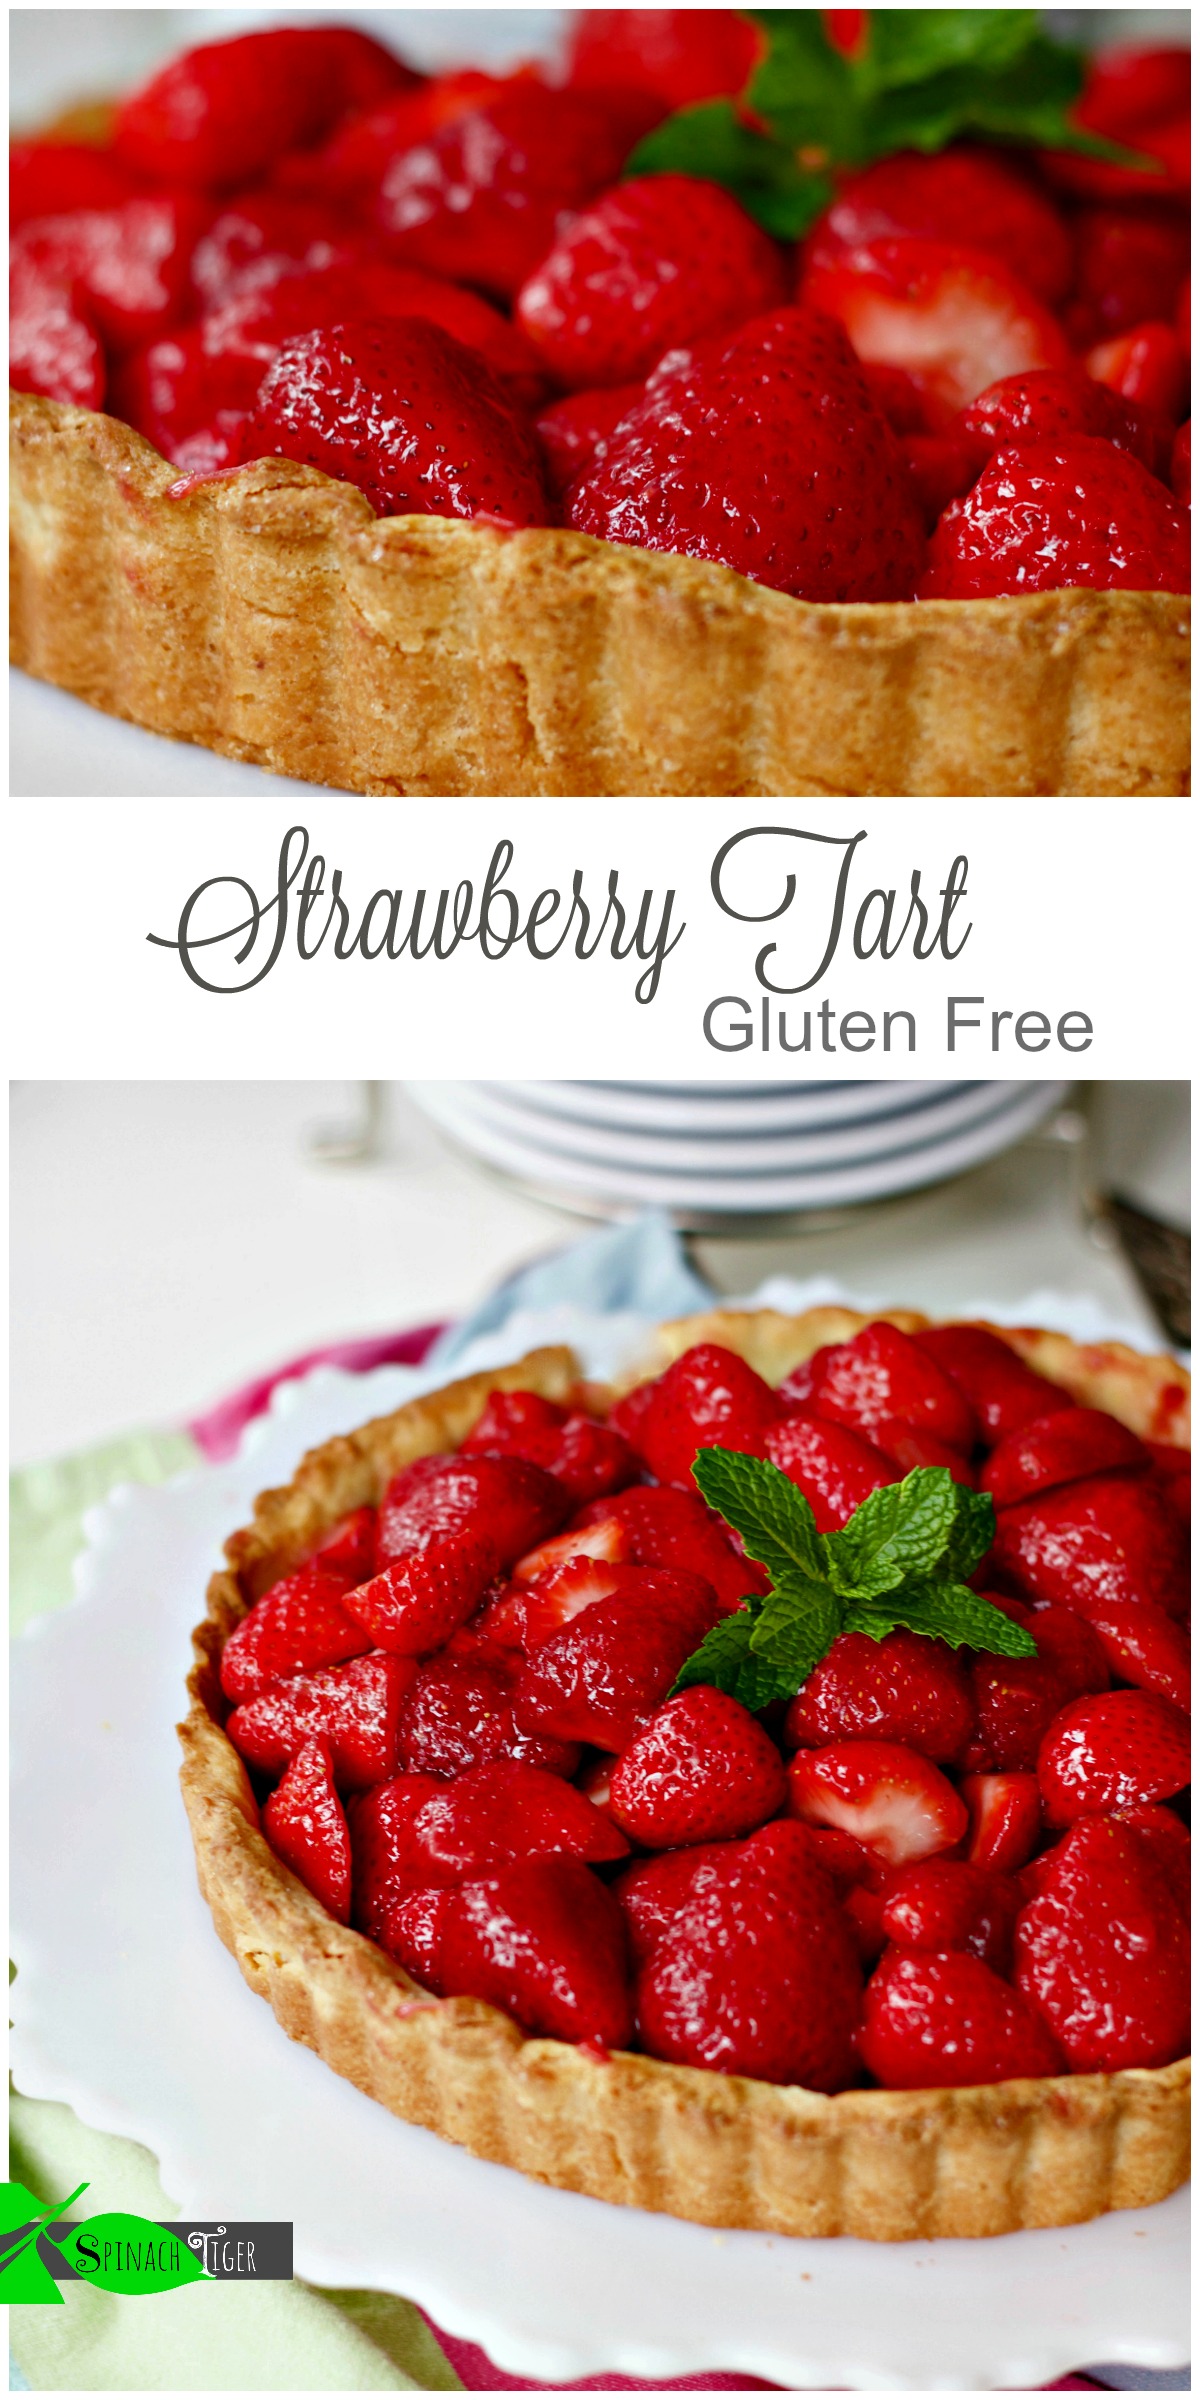  Gluten Free Easy Strawberry Pie Recipe from Spinach Tiger